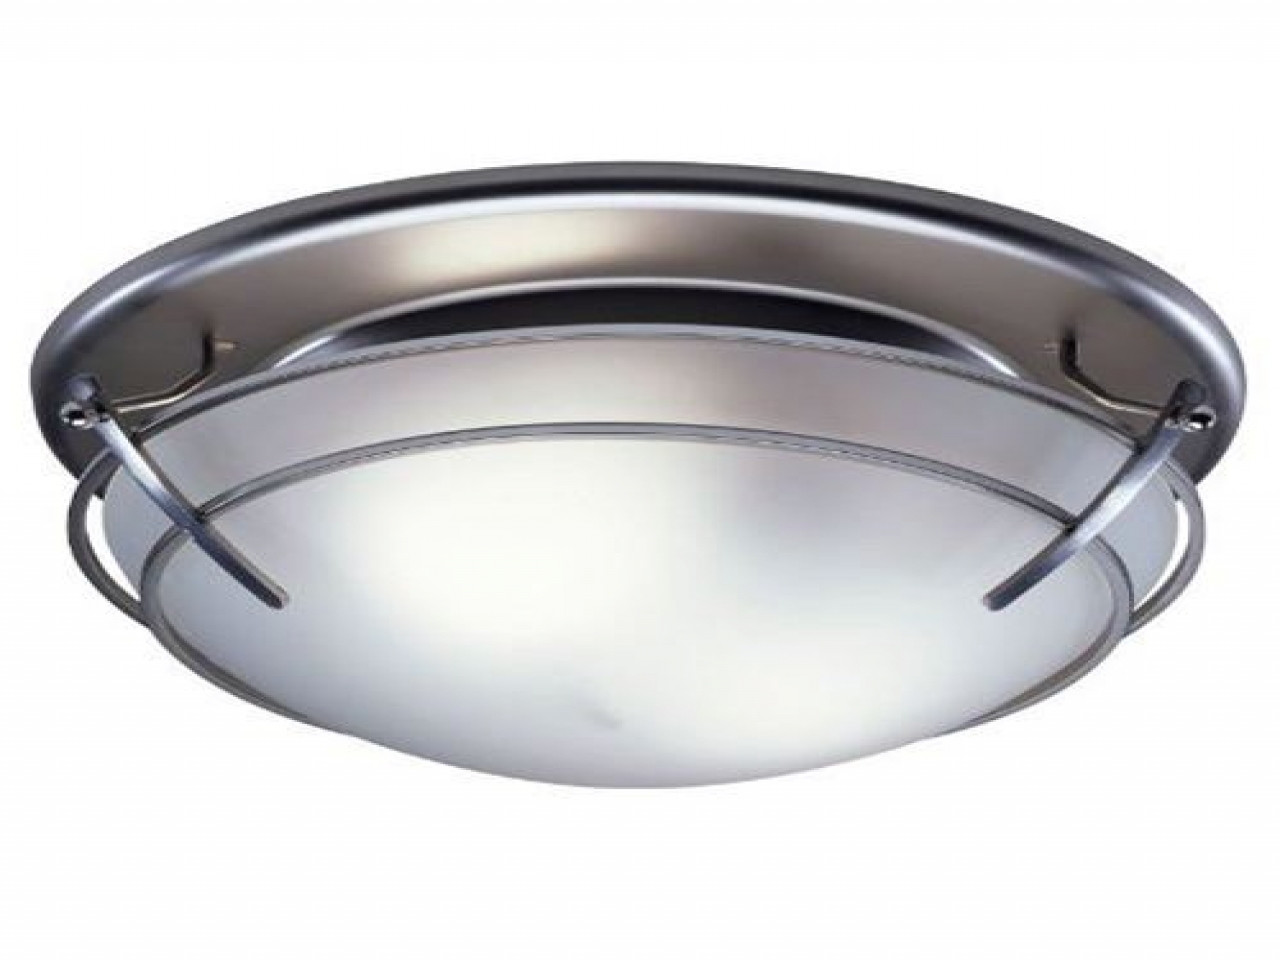 decorative kitchen exhaust fan with light